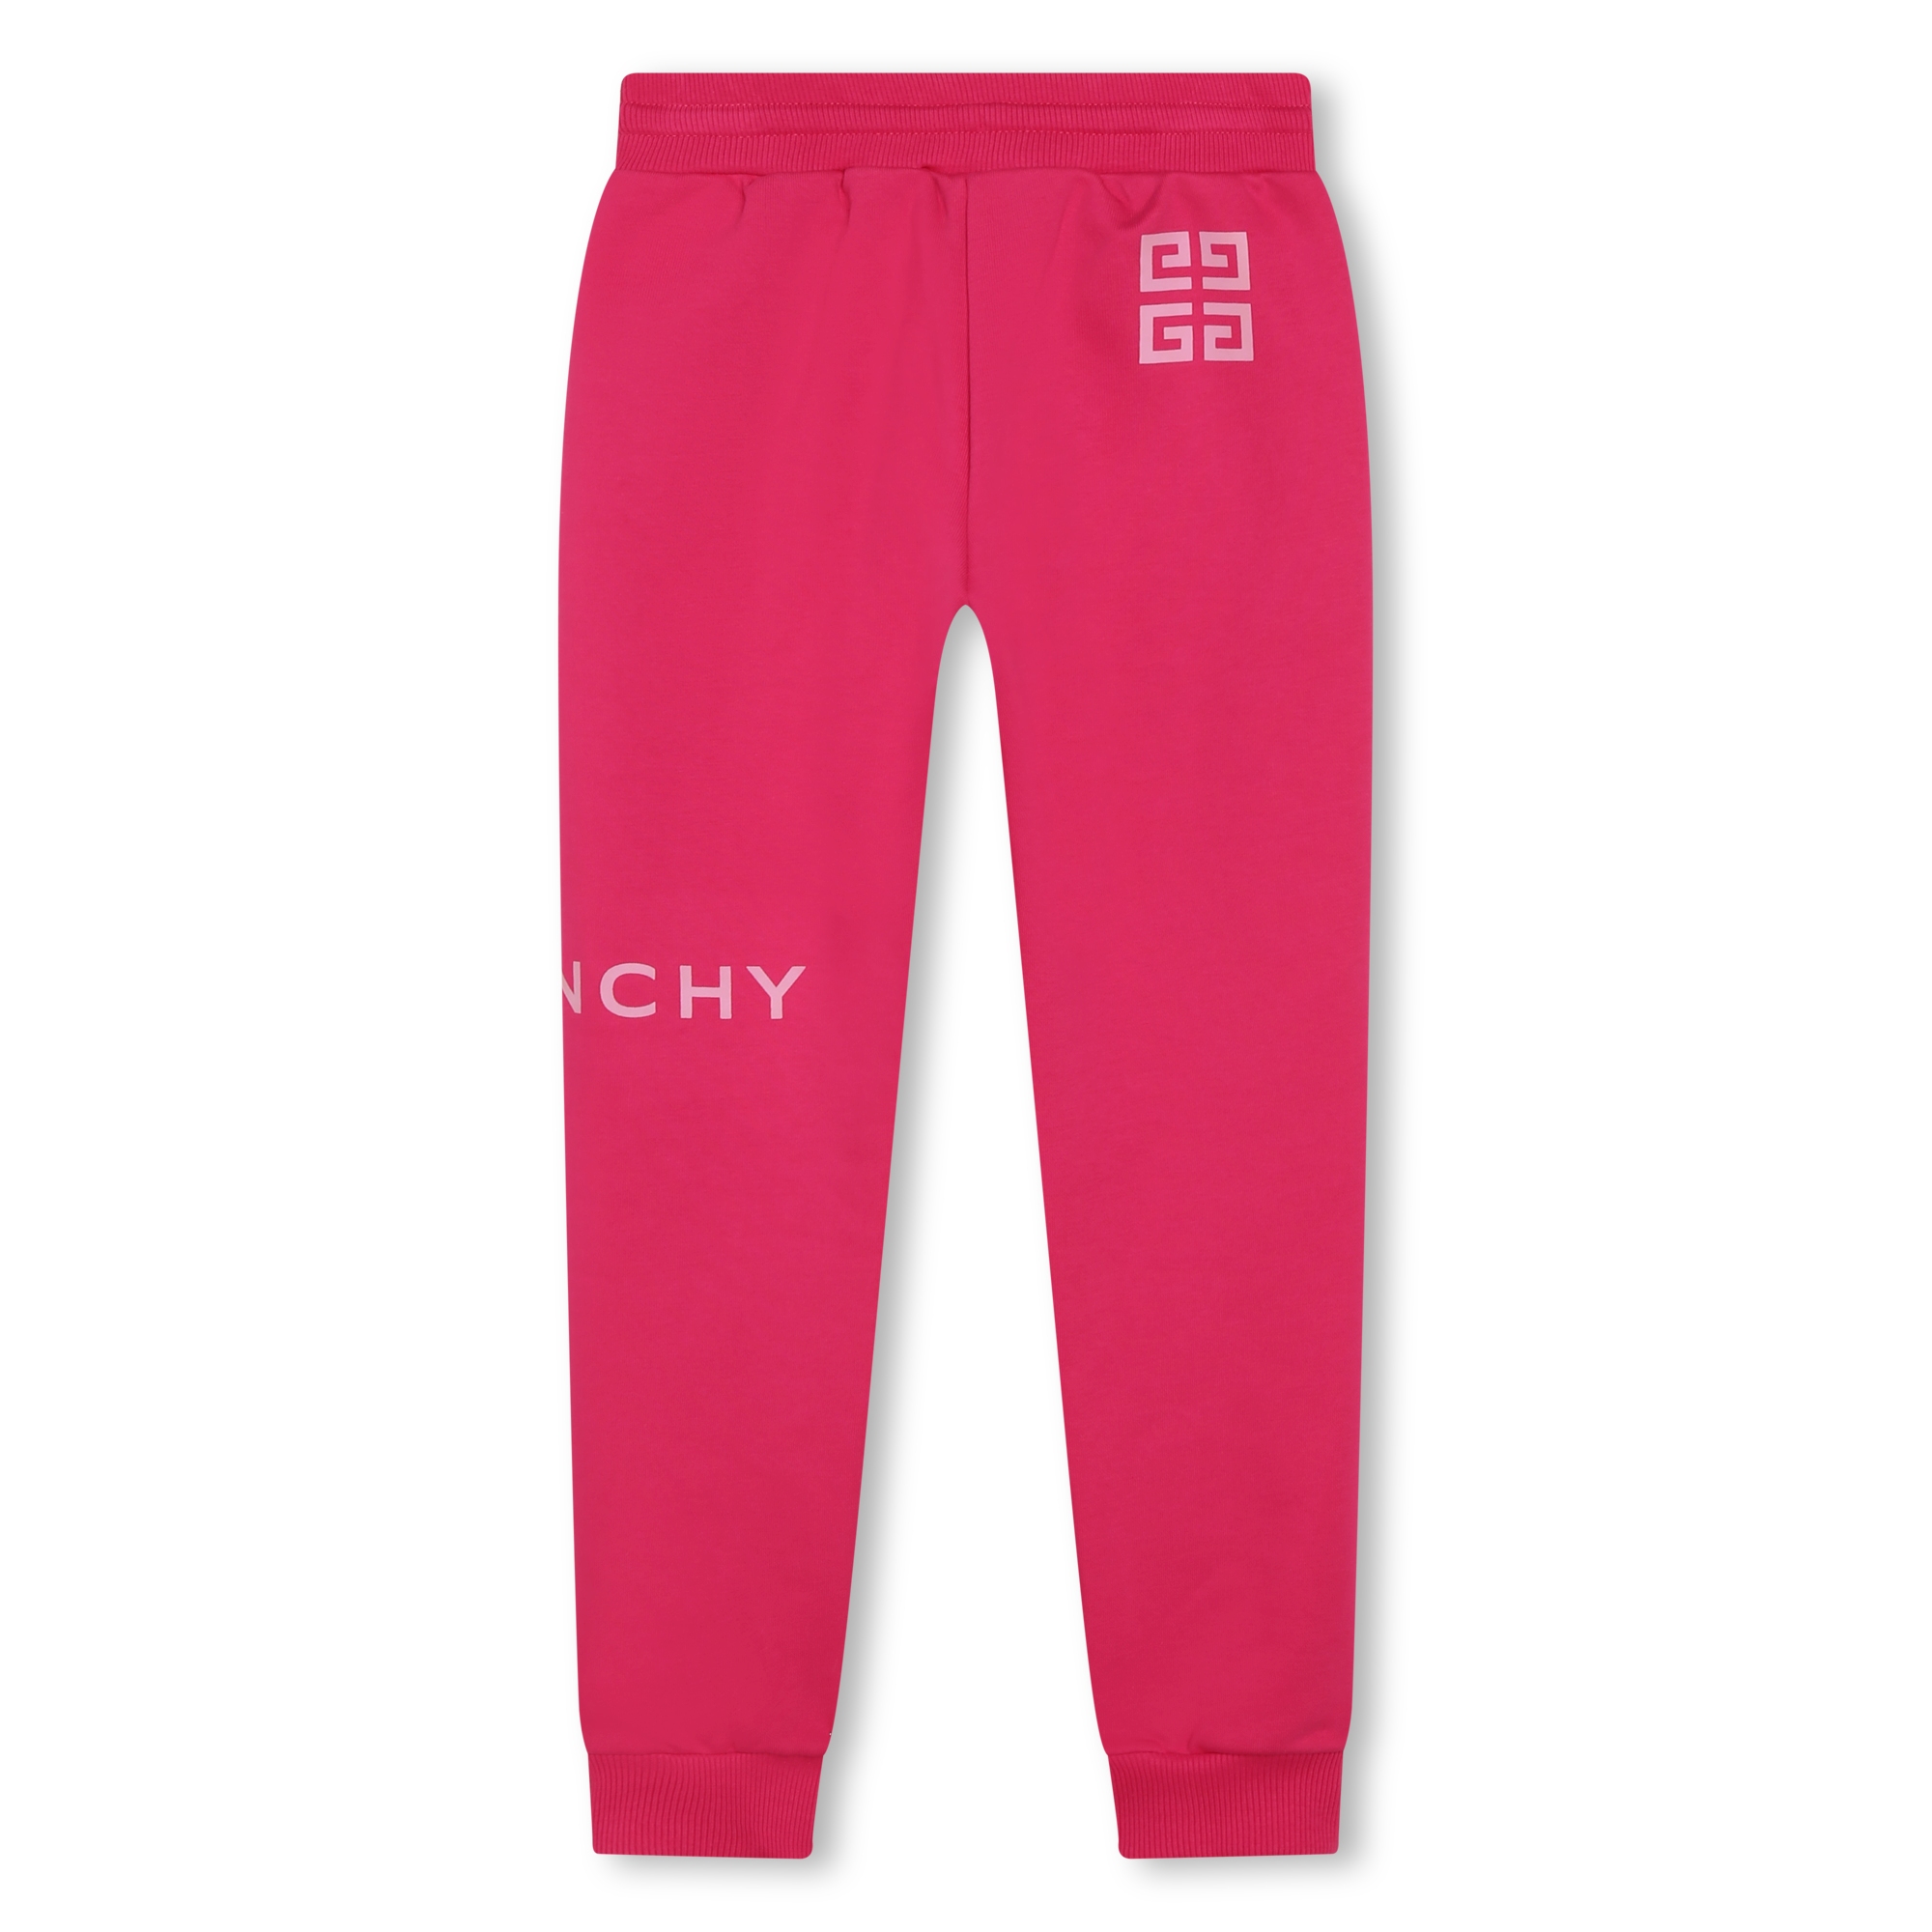 Fleece jogging trousers GIVENCHY for GIRL